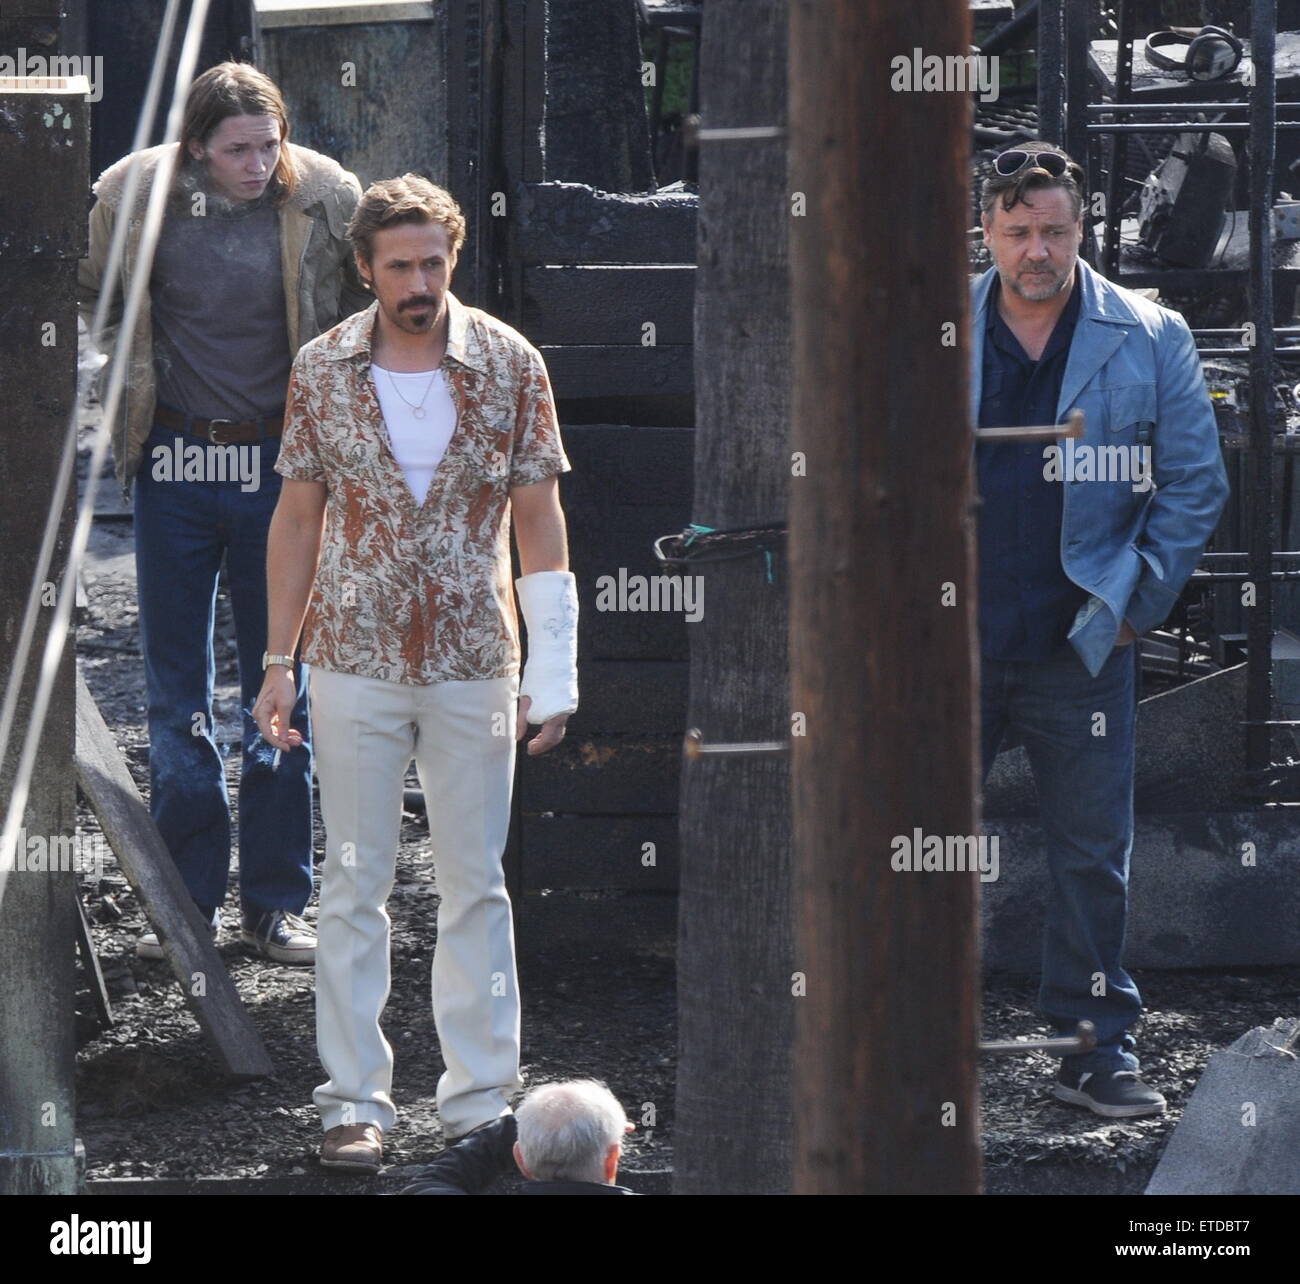 Actor Ryan Gosling spotted taking a smoking break on the set of 